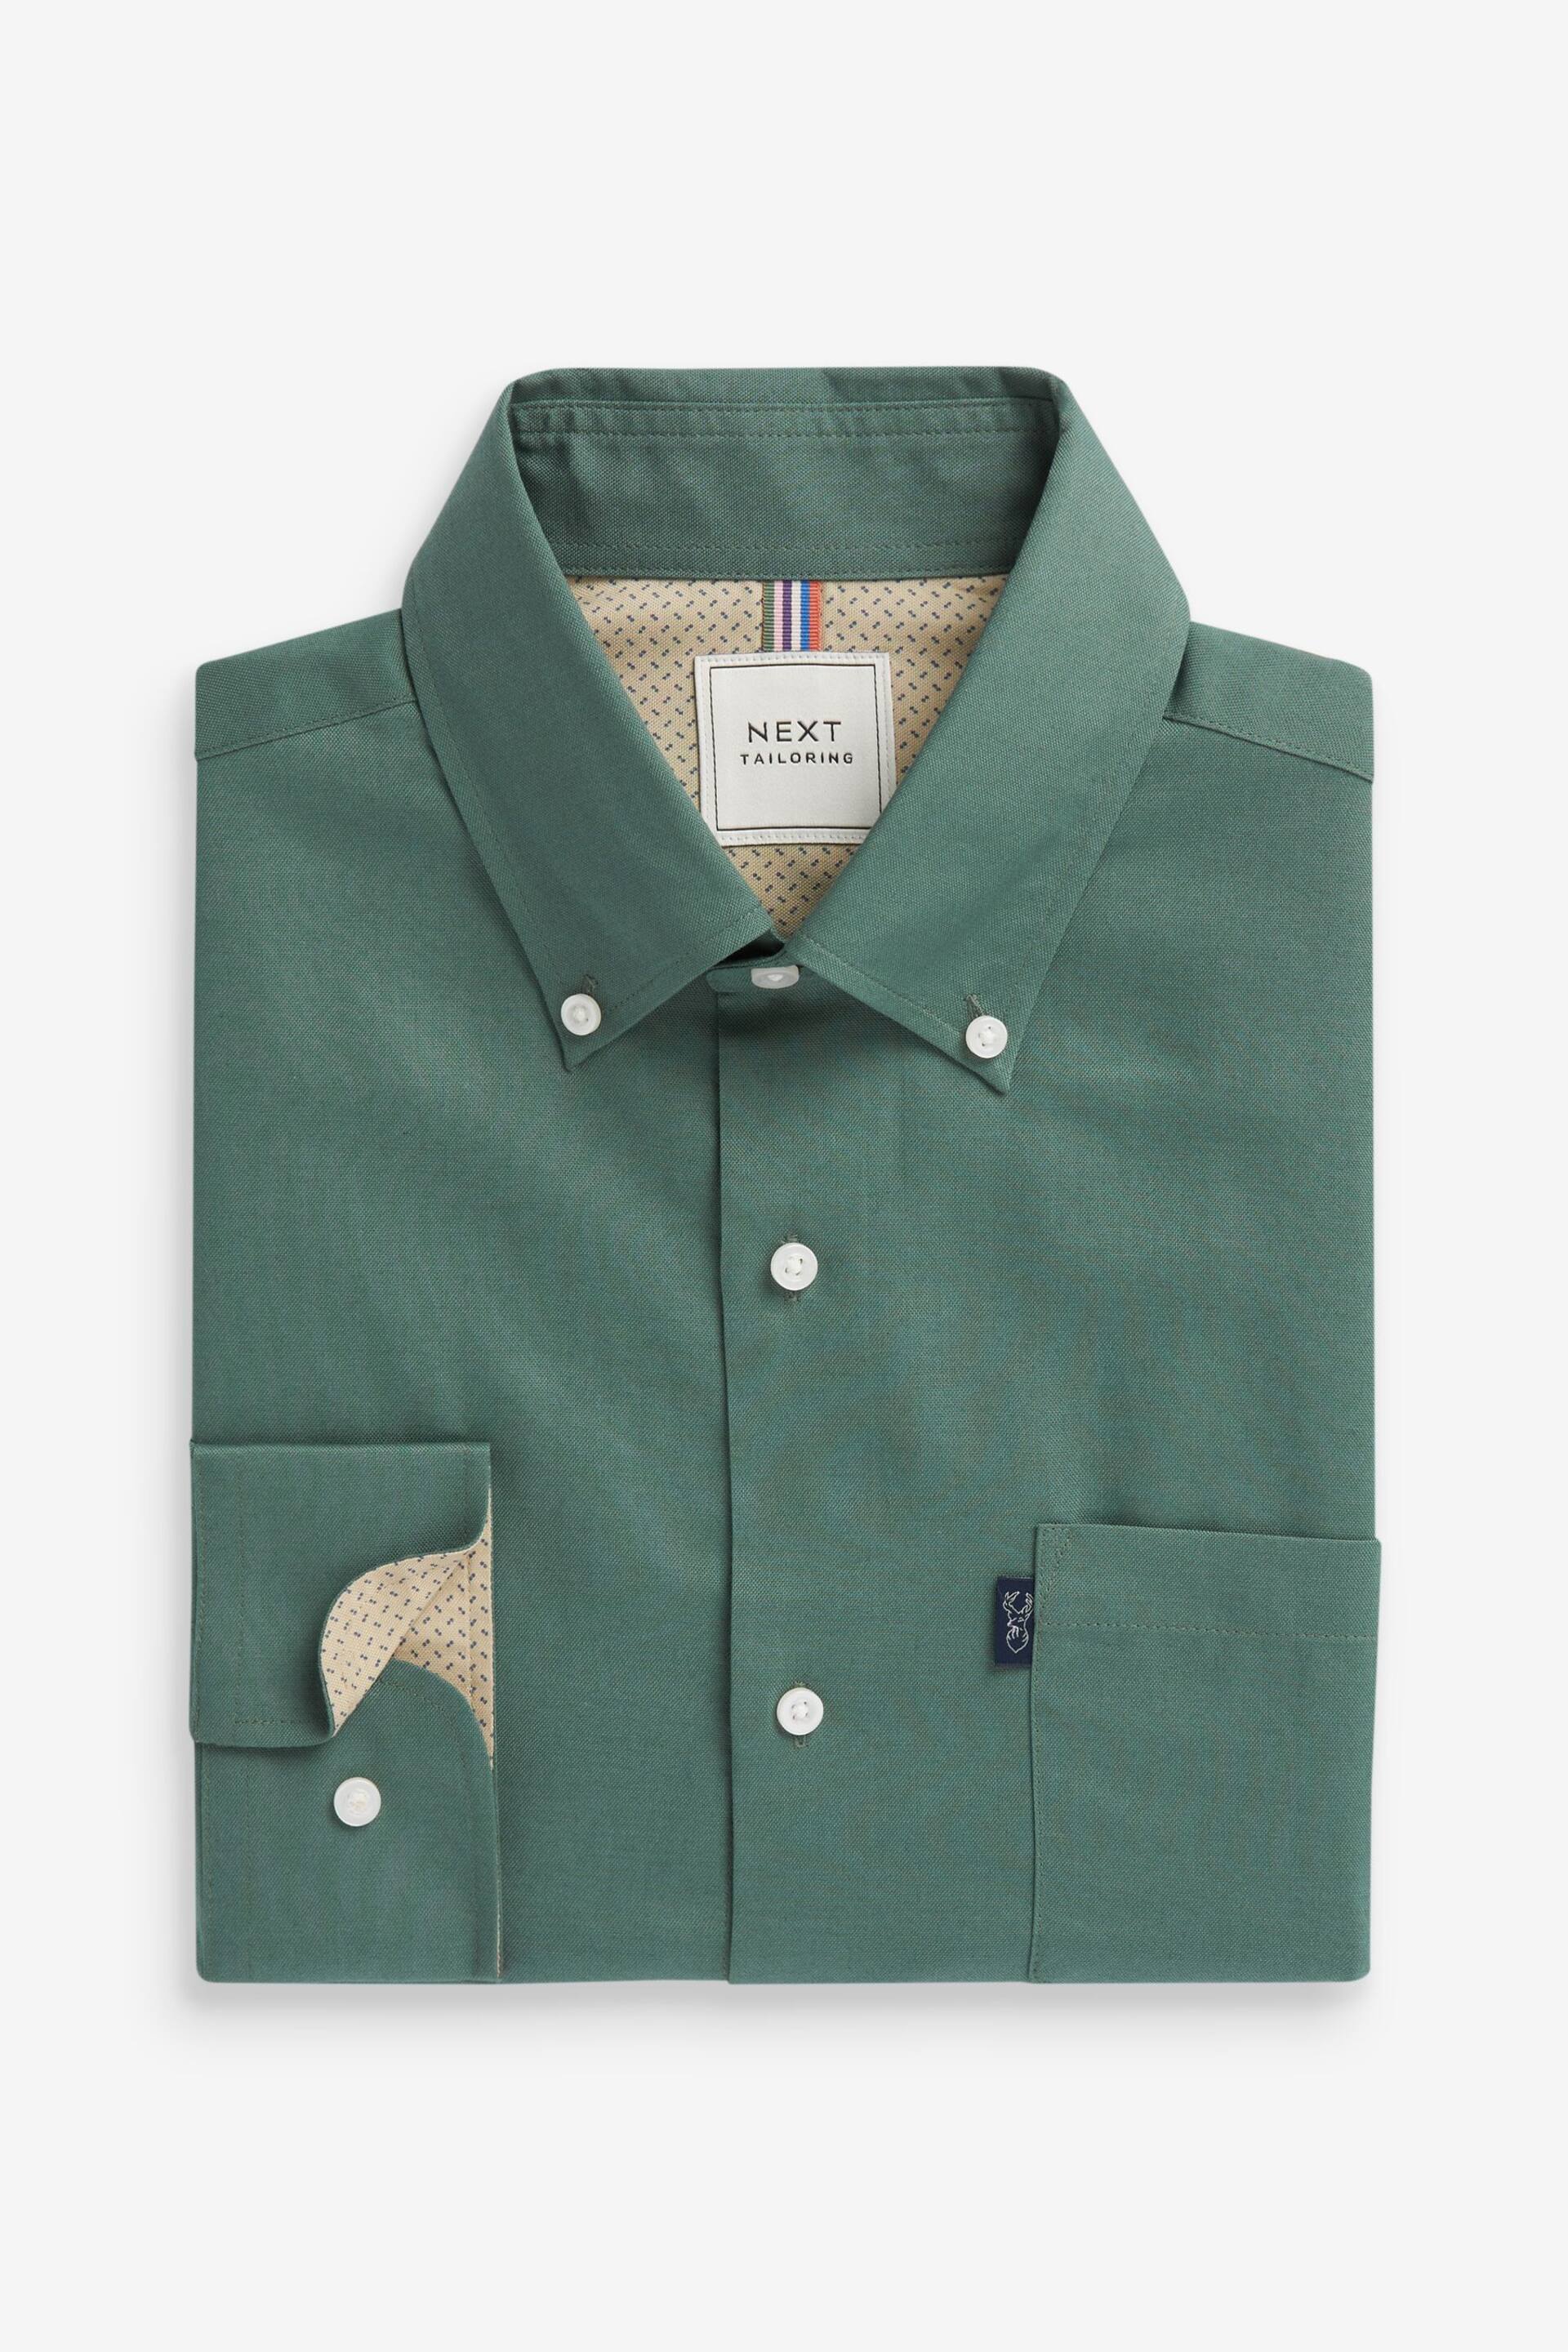 Seafoam Green Slim Fit Easy Iron Button Down Oxford Shirt - Image 6 of 8